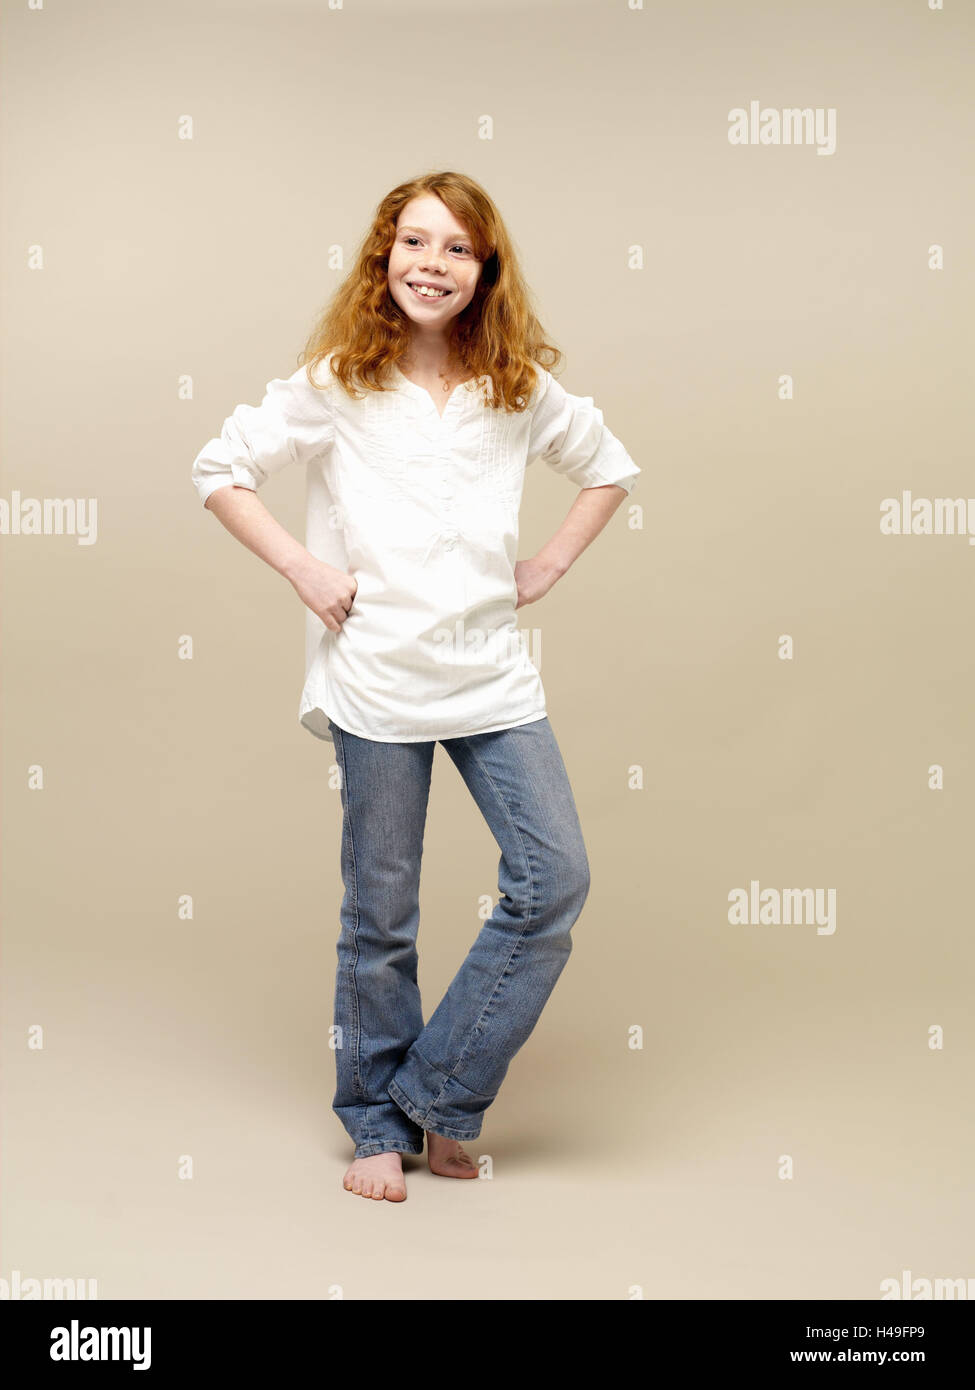 Girls, red-haired, self-confidently, gesture, hands hips, child, long-haired, jeans, blouse, shirt, leisurewear, careless, barefoot, stand, smile, add support contently, happy, mischievously, hands, hips, young persons, youth, childhood, side glance, whole body, studio, Stock Photo